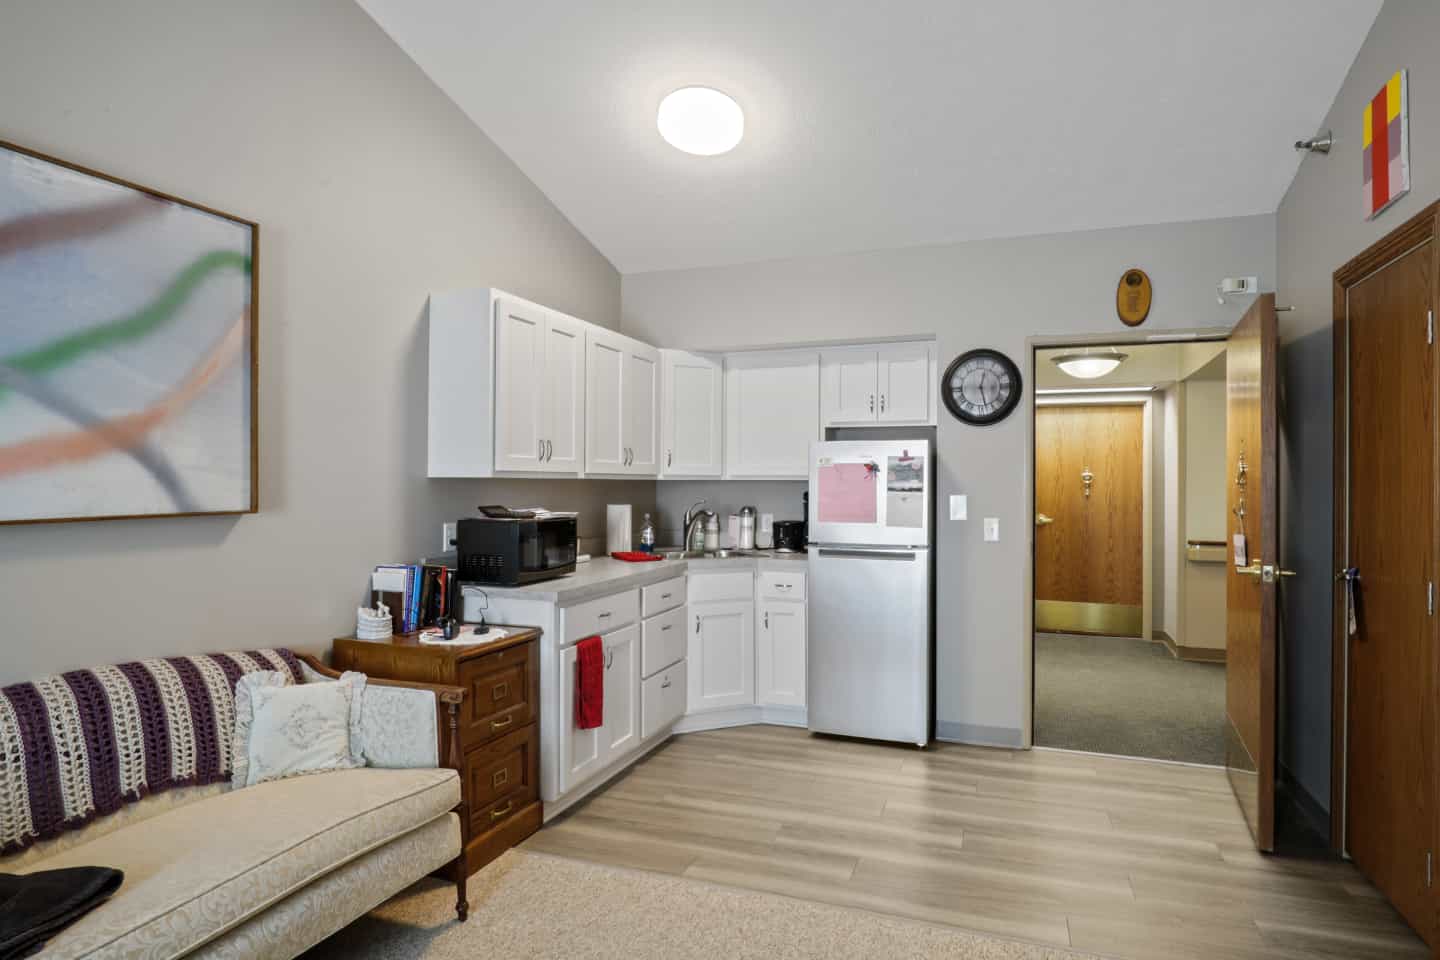 Assisted Living - One Bedroom Kitchenette